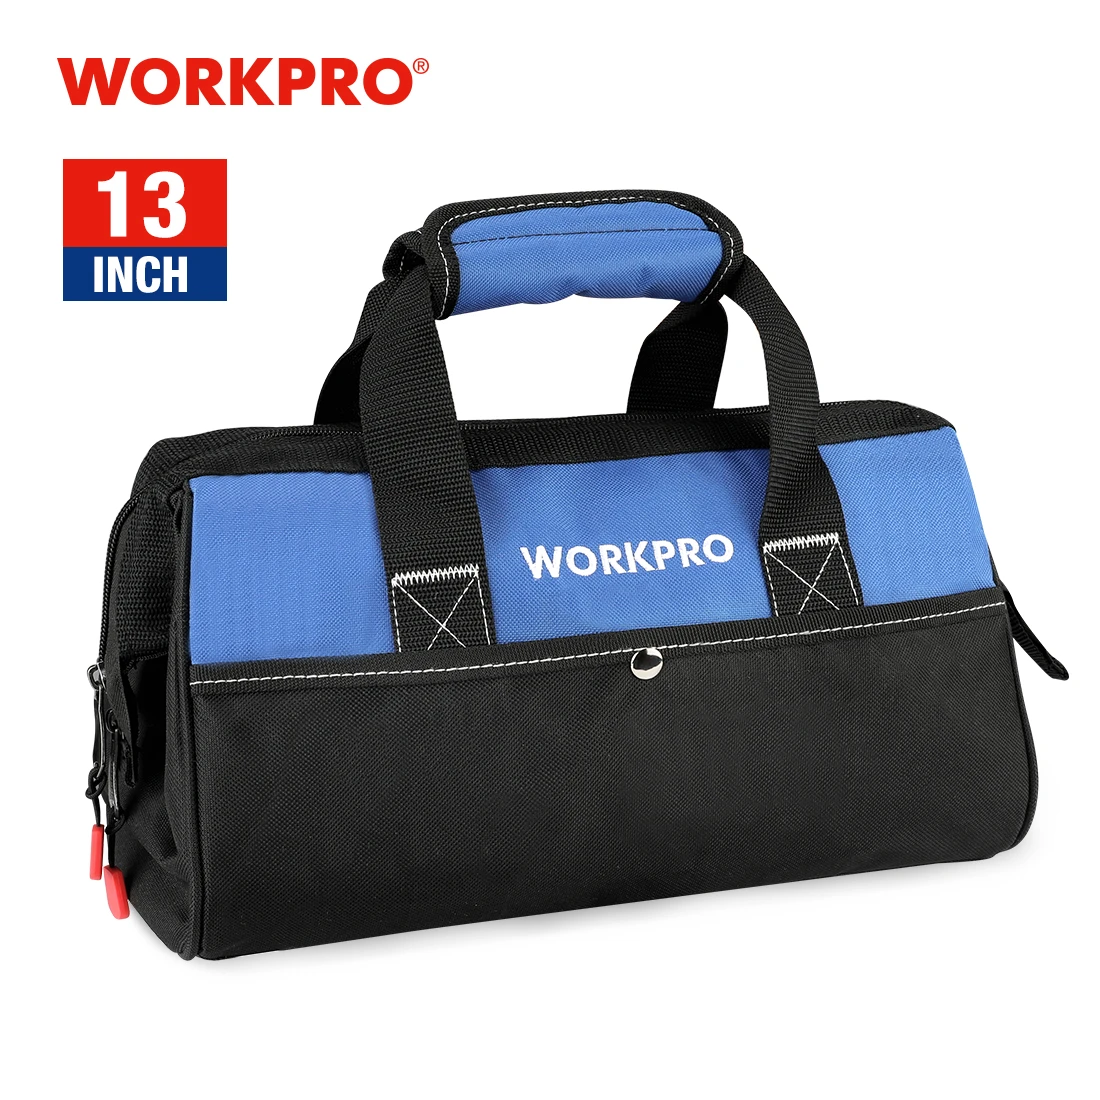 WORKPRO 13inch Hand Tool Bag 600D Ployster Electrician Bag Tool Organizers Portable Waterproof Tool Storage Bag